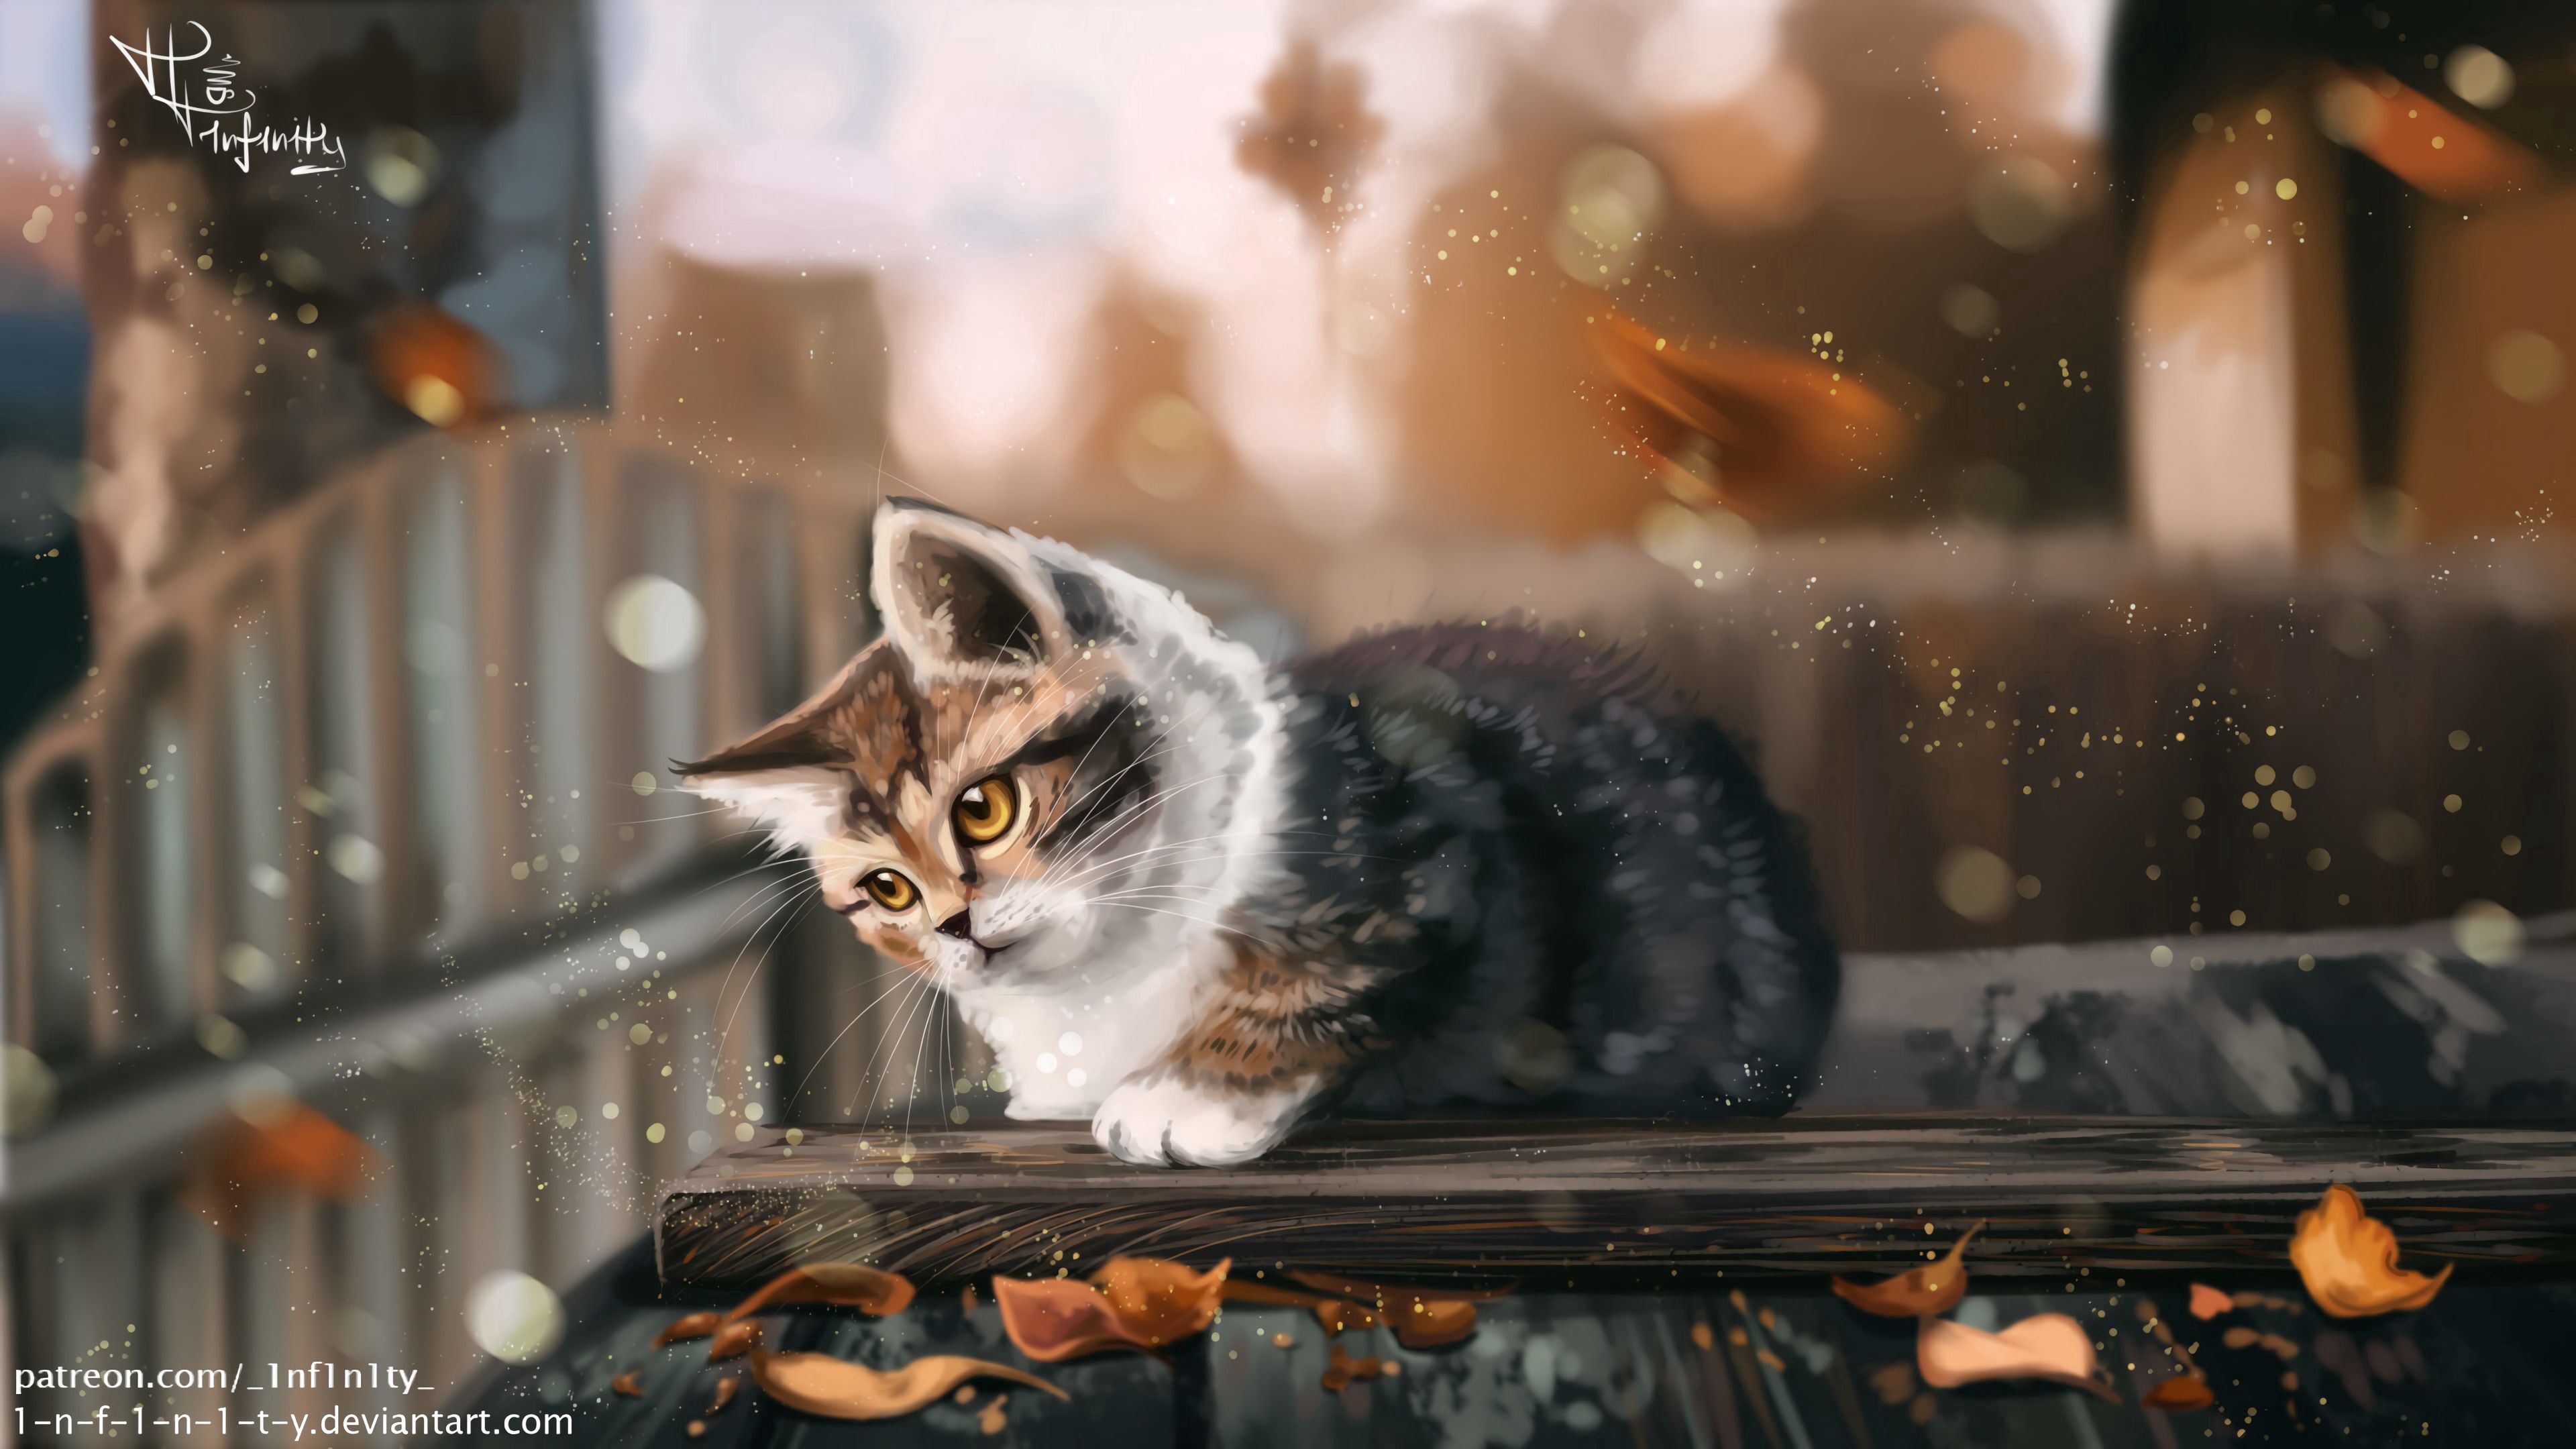 63509 download wallpaper art, autumn, leaves, cat, kitty, kitten screensavers and pictures for free